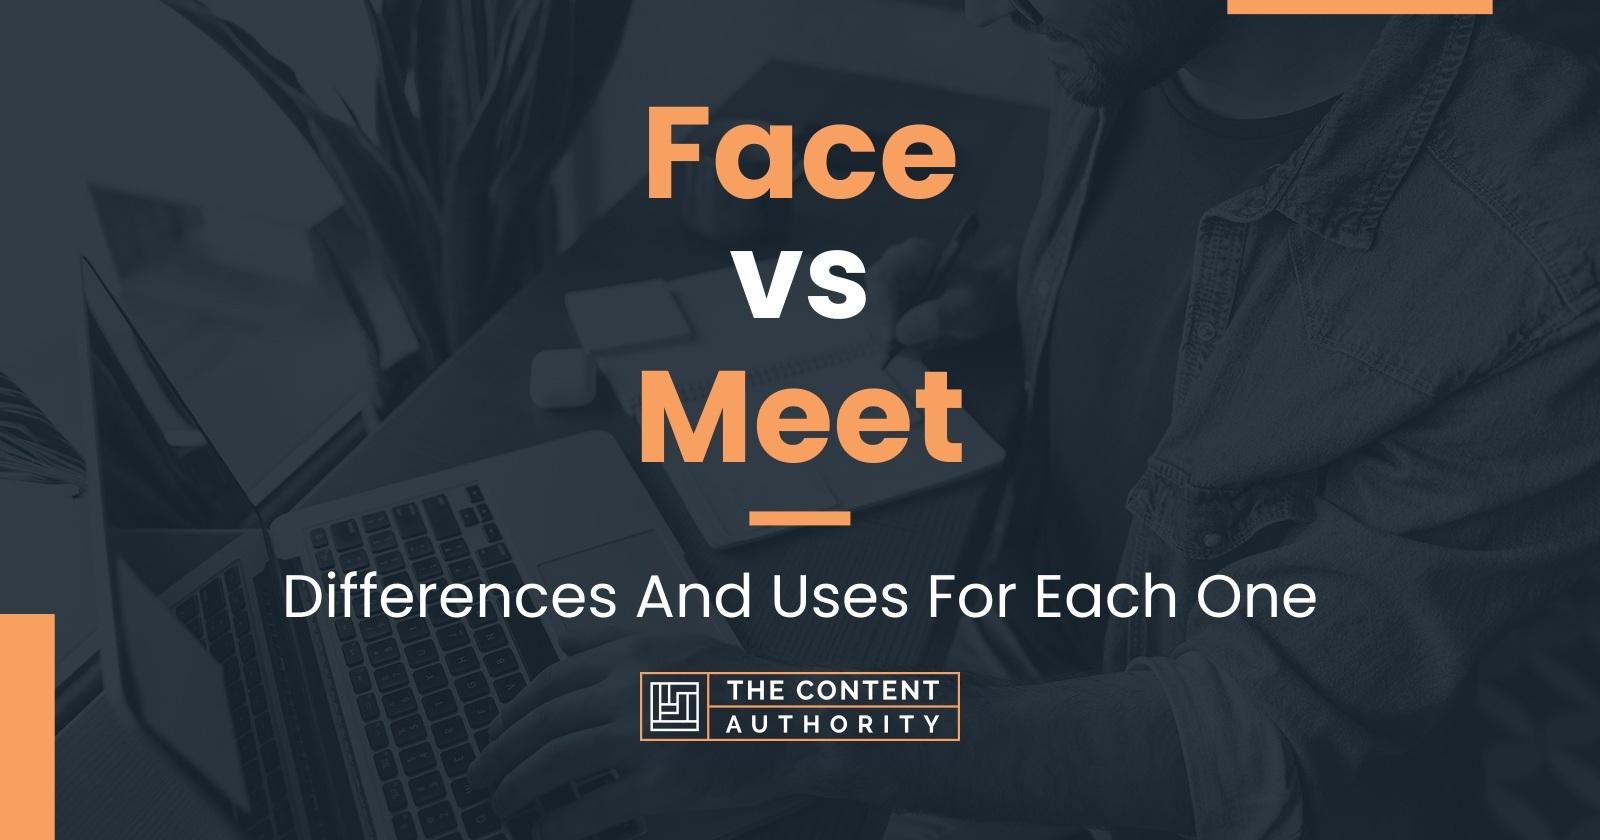 Face vs Meet: Differences And Uses For Each One